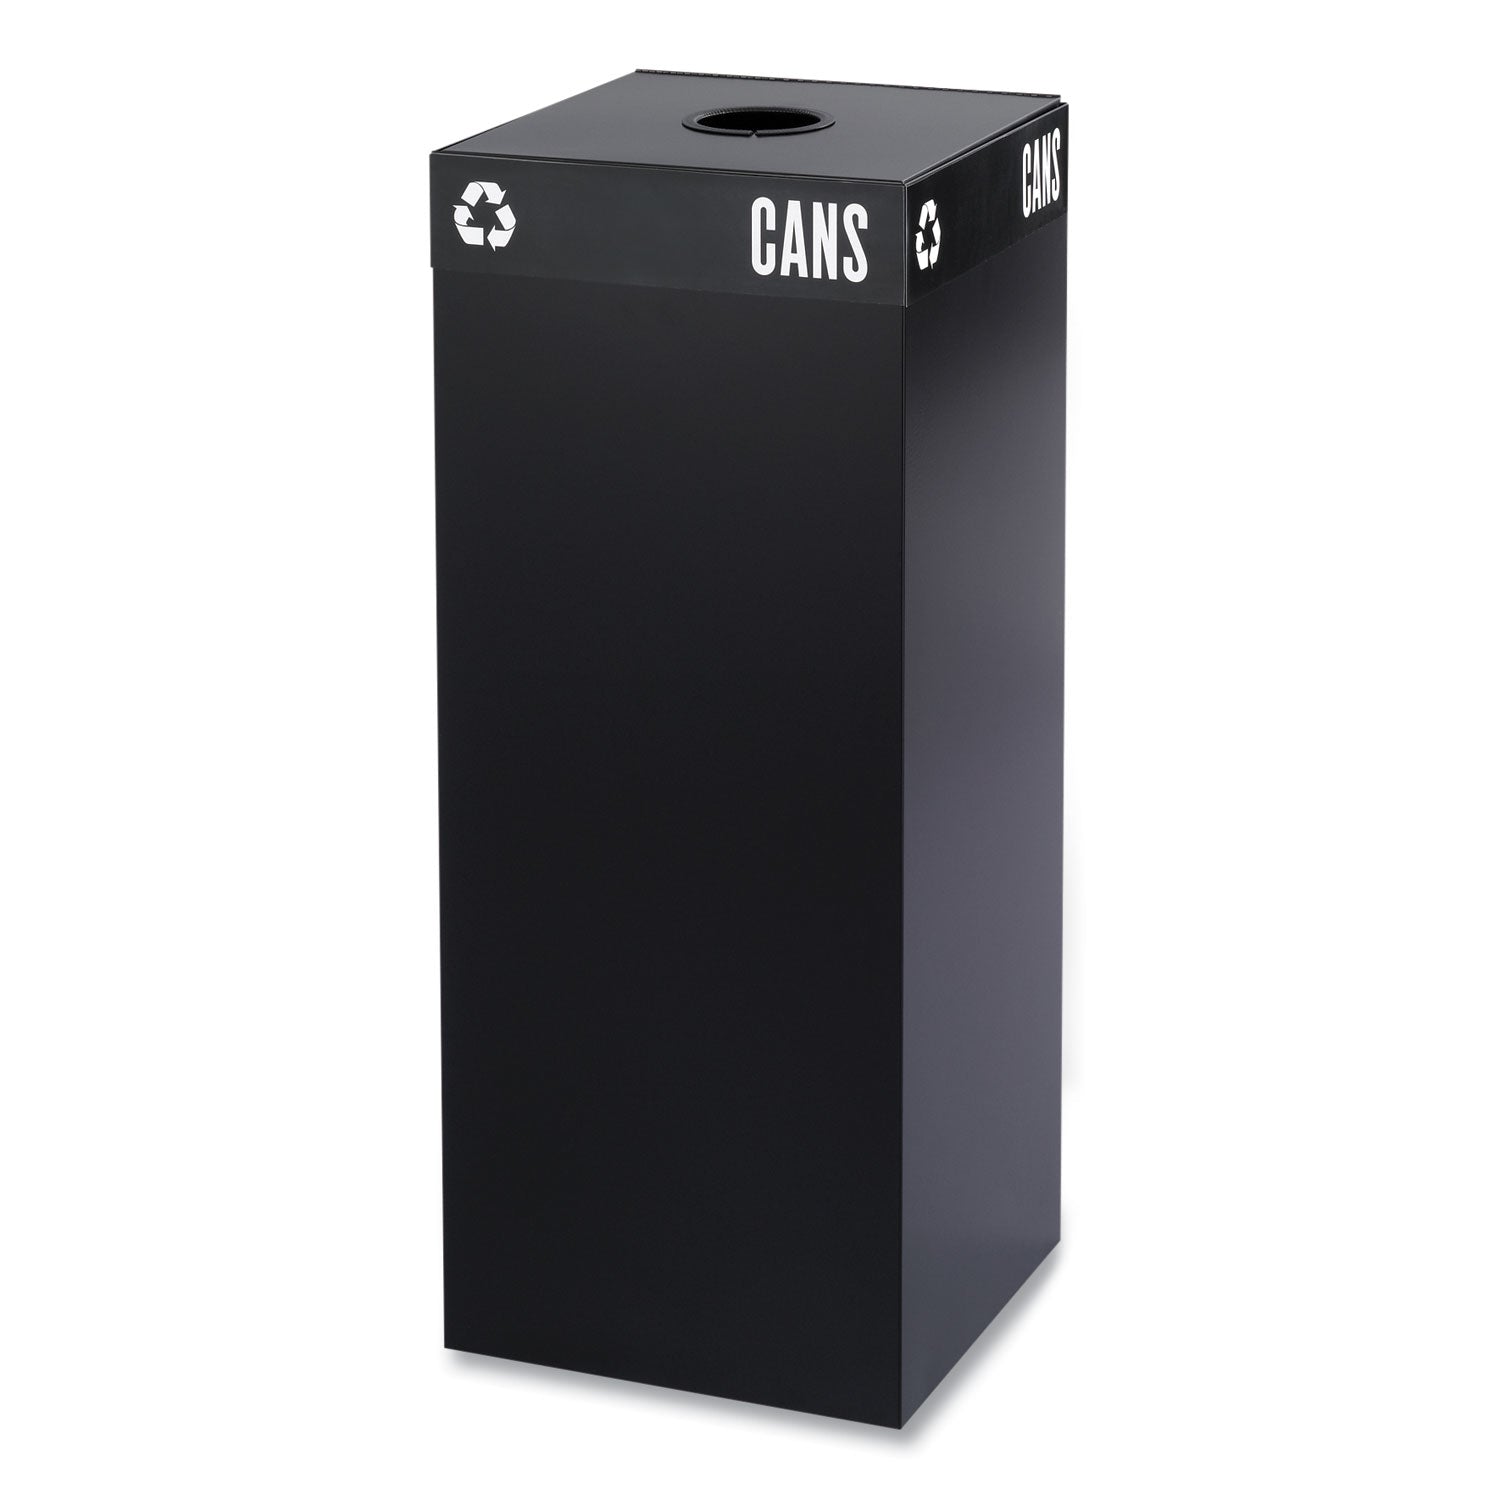 Public Square Recycling Receptacles, Can Recycling, 37 gal, Steel, Black - 